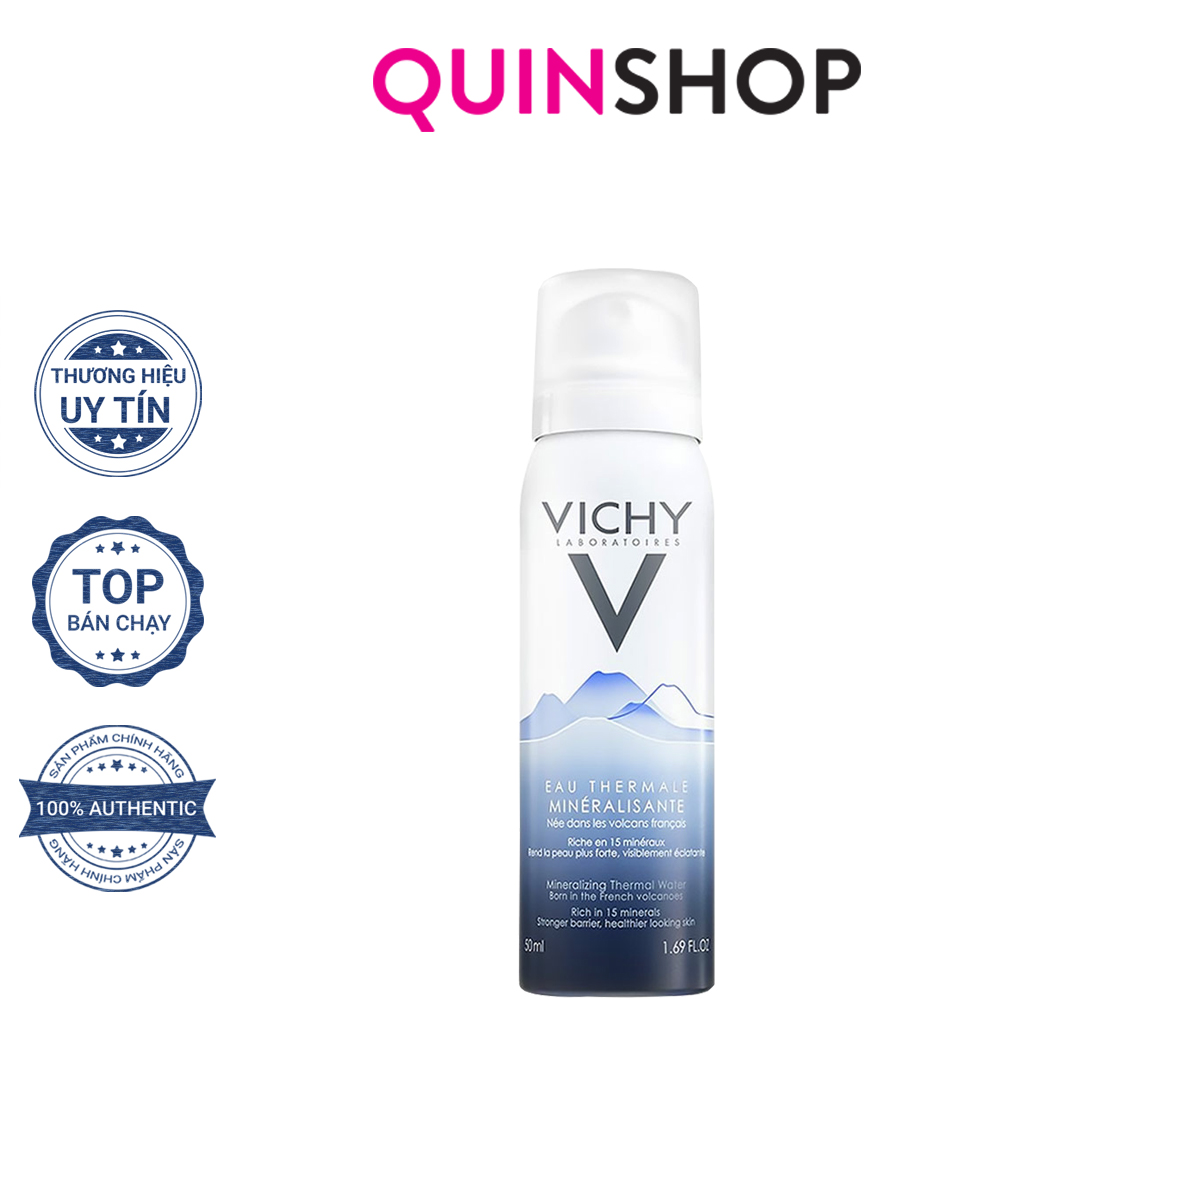 Xịt Khoáng Vichy Eau Thermale Mineralizing Thermal Water 50g